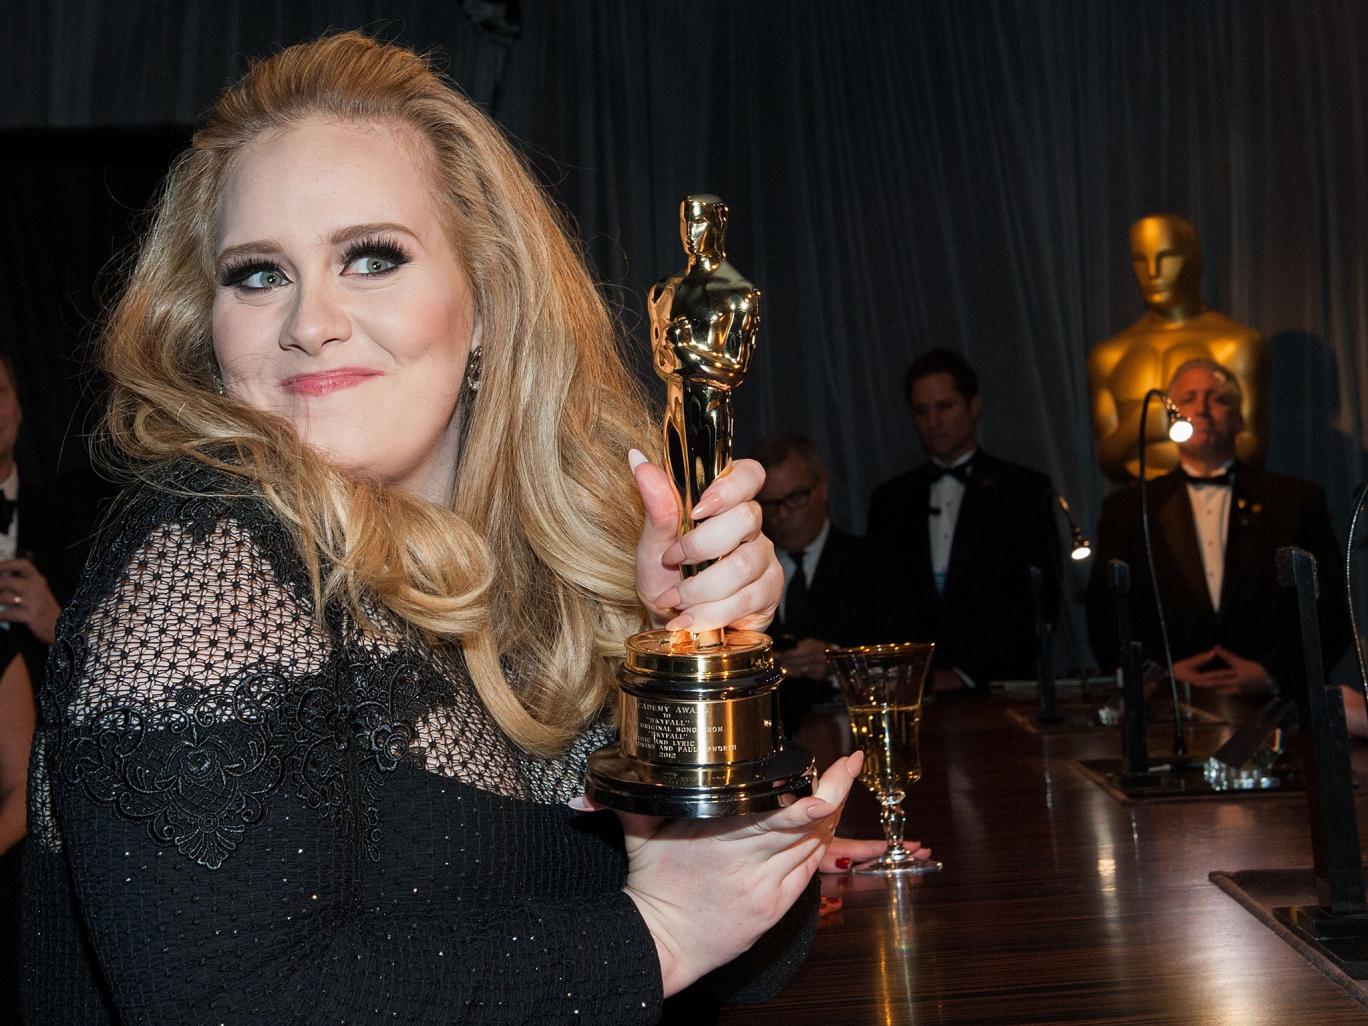 Music fans shunning CDs and downloads has hit the record label behind Adele